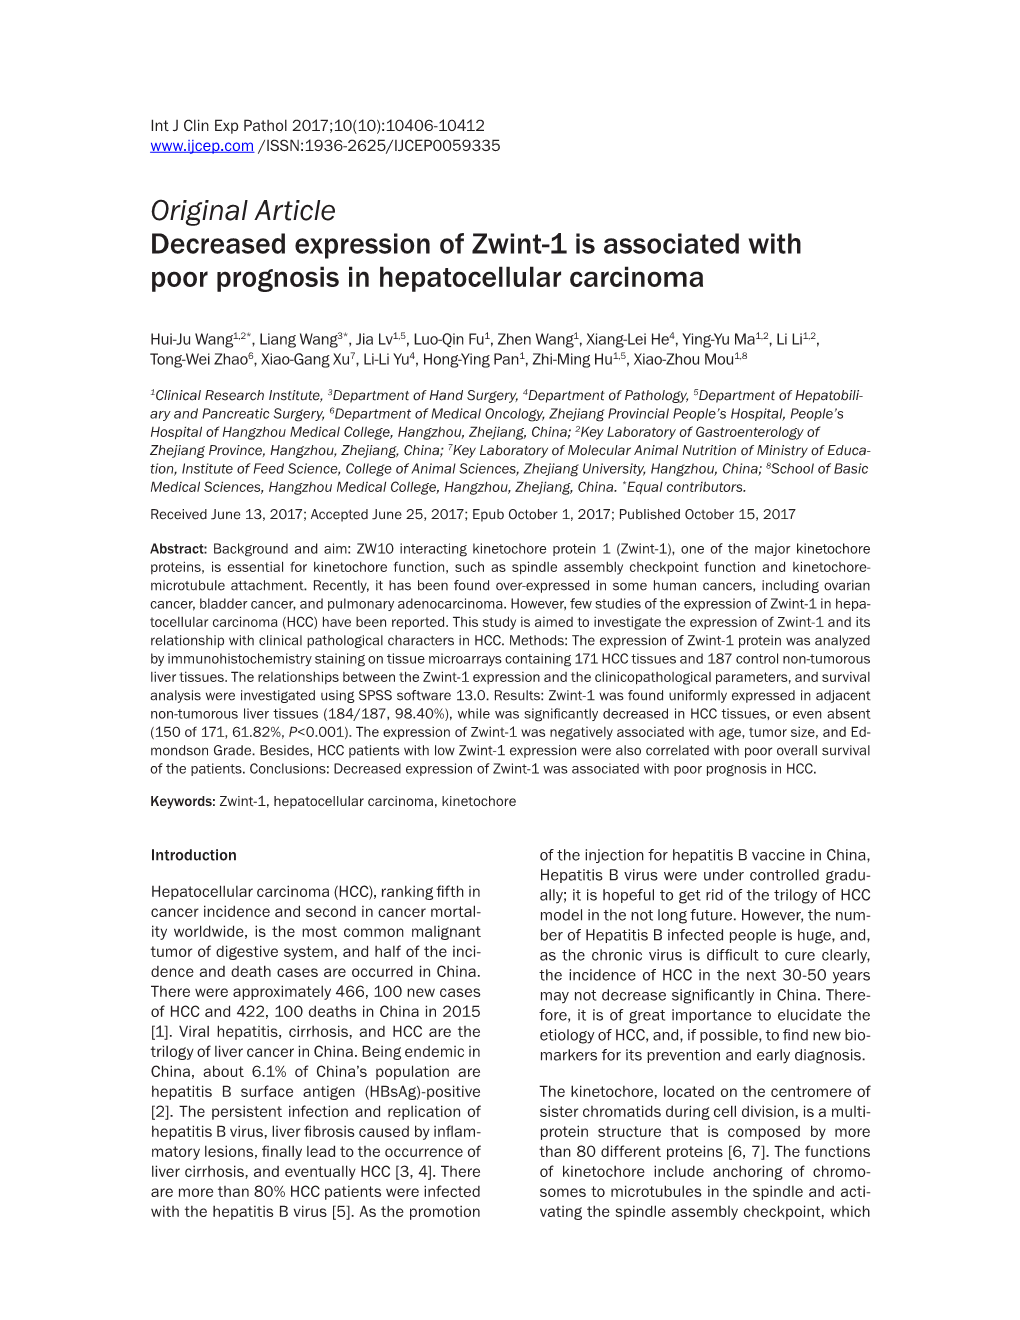 Original Article Decreased Expression of Zwint-1 Is Associated with Poor Prognosis in Hepatocellular Carcinoma